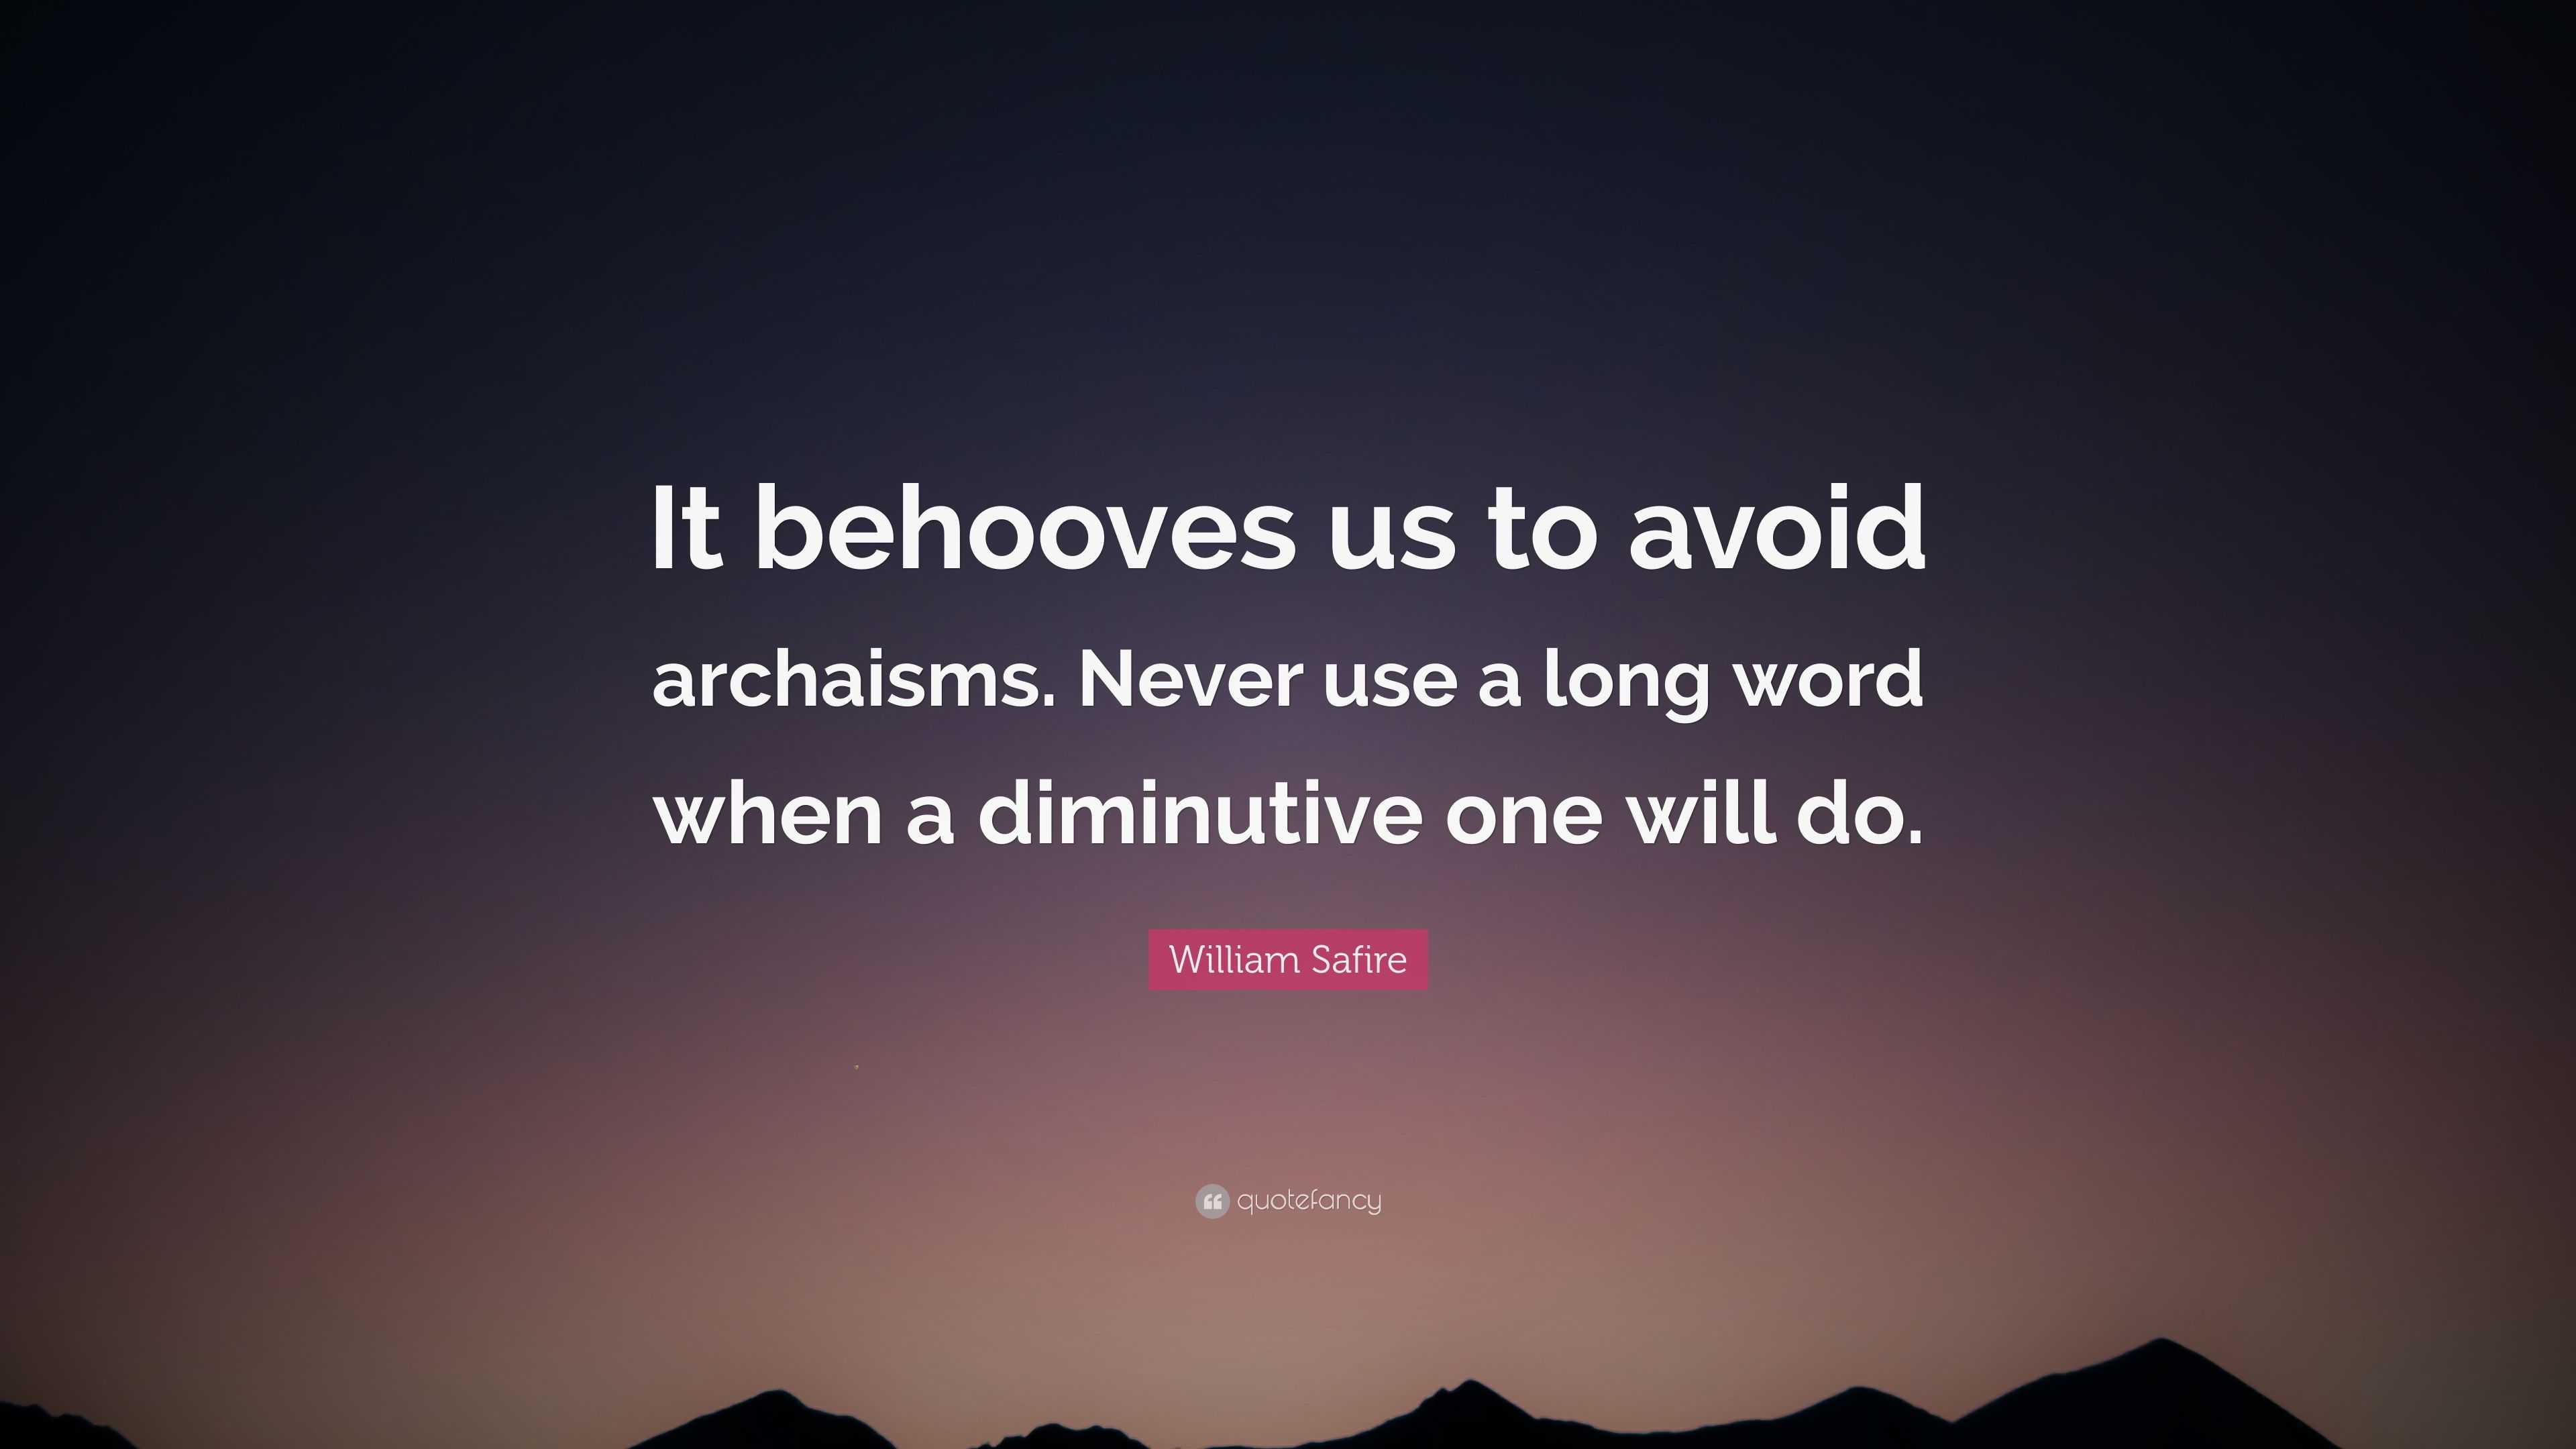 William Safire Quote: “It behooves us to avoid archaisms. Never use a ...